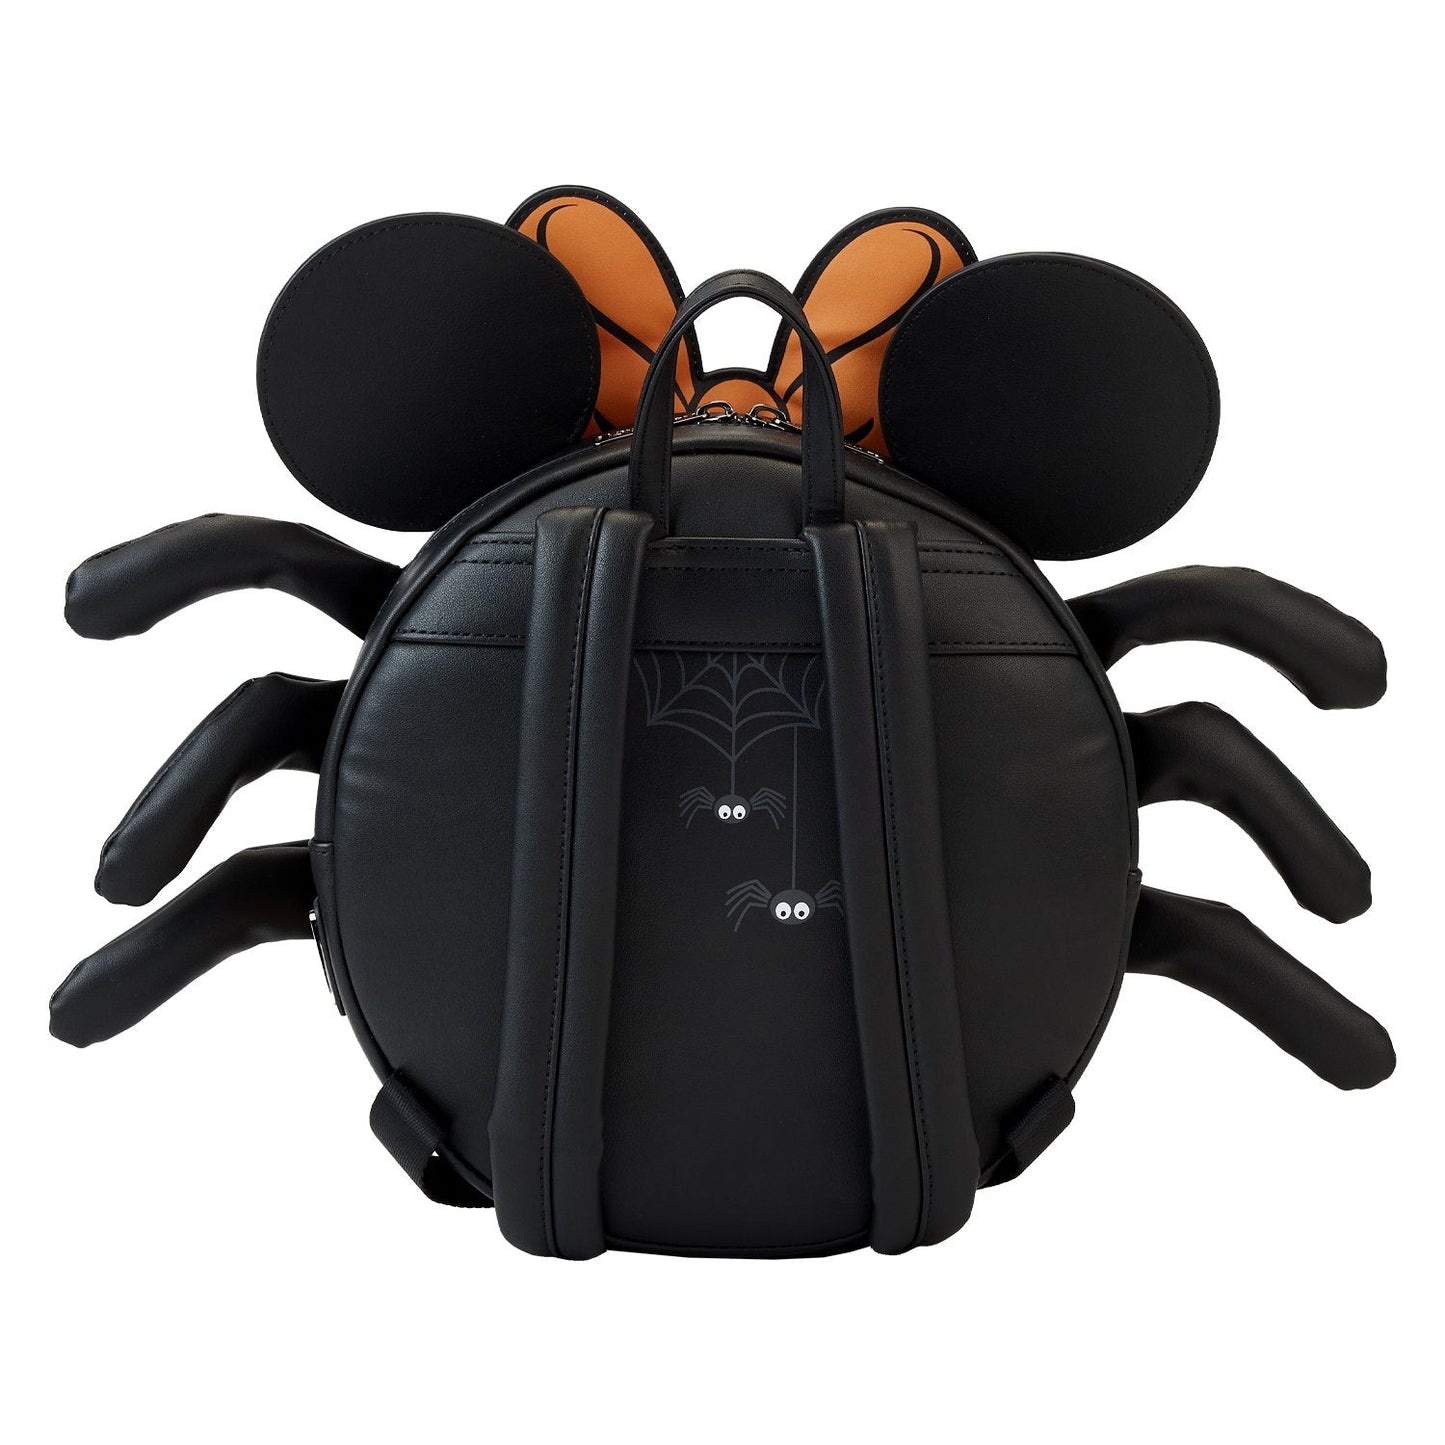 Minnie Mouse Spider mini backpack